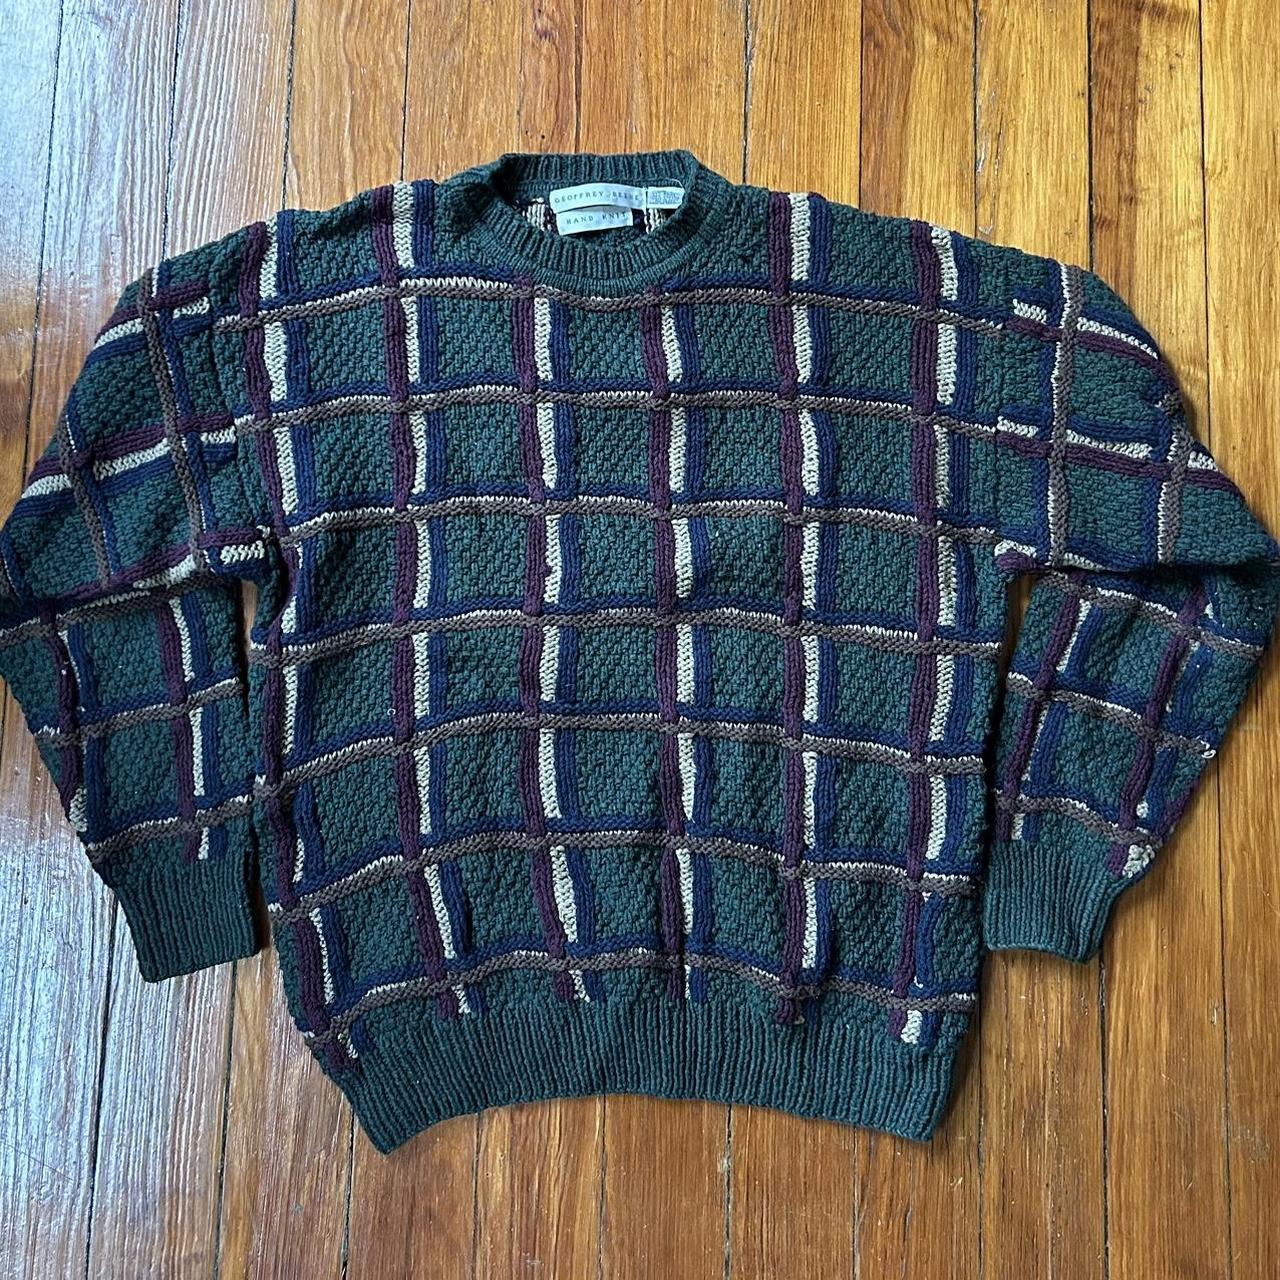 item listed by speencitythrift